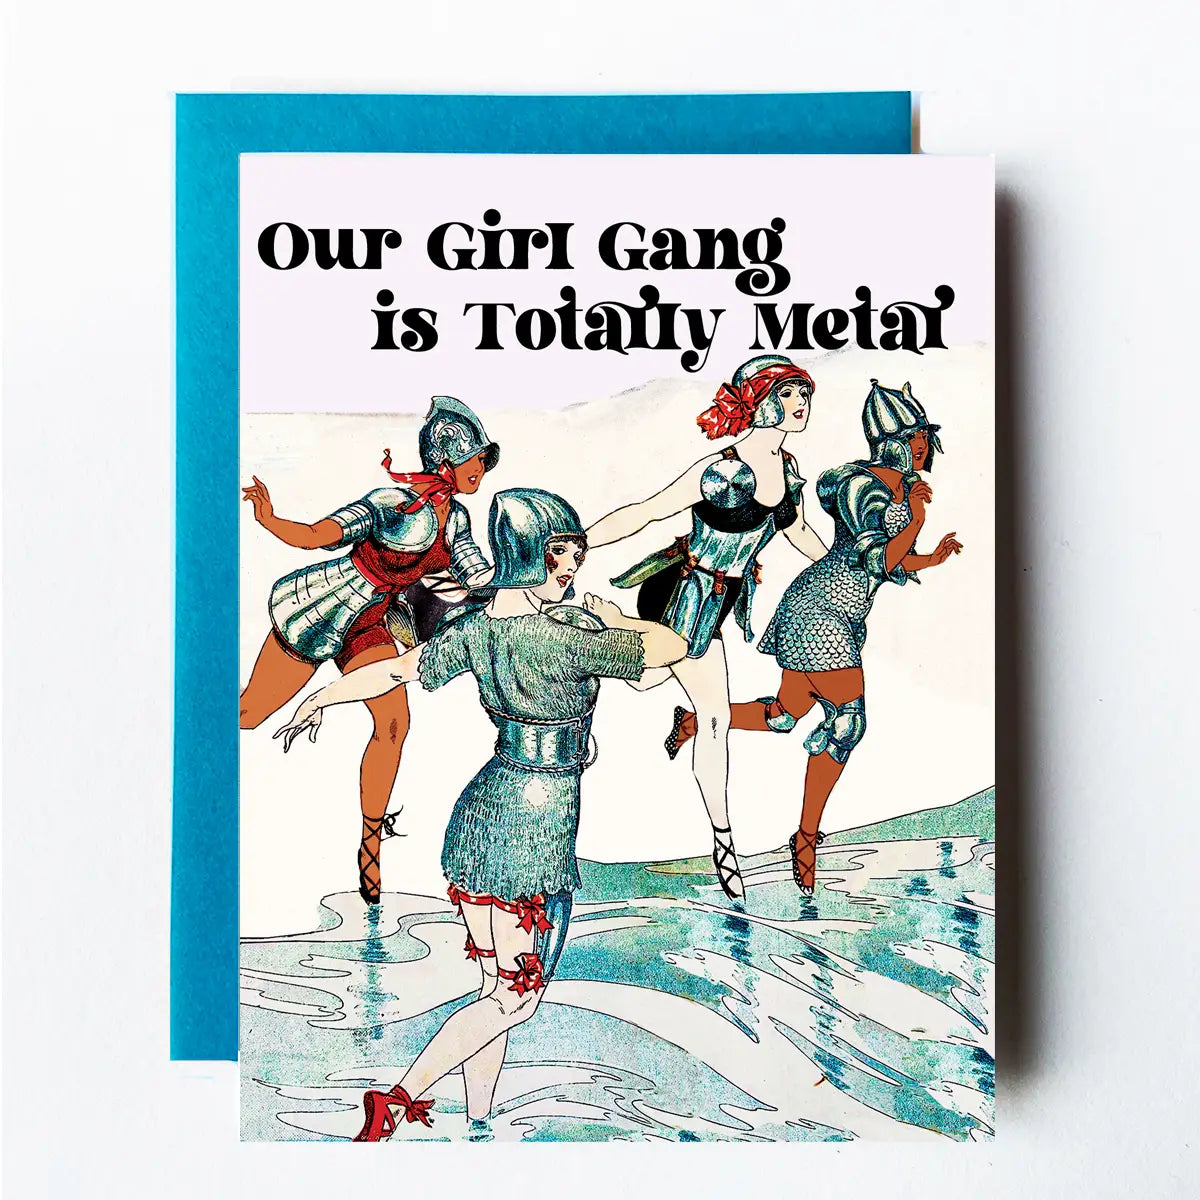 Our girl gang is totally greeting card